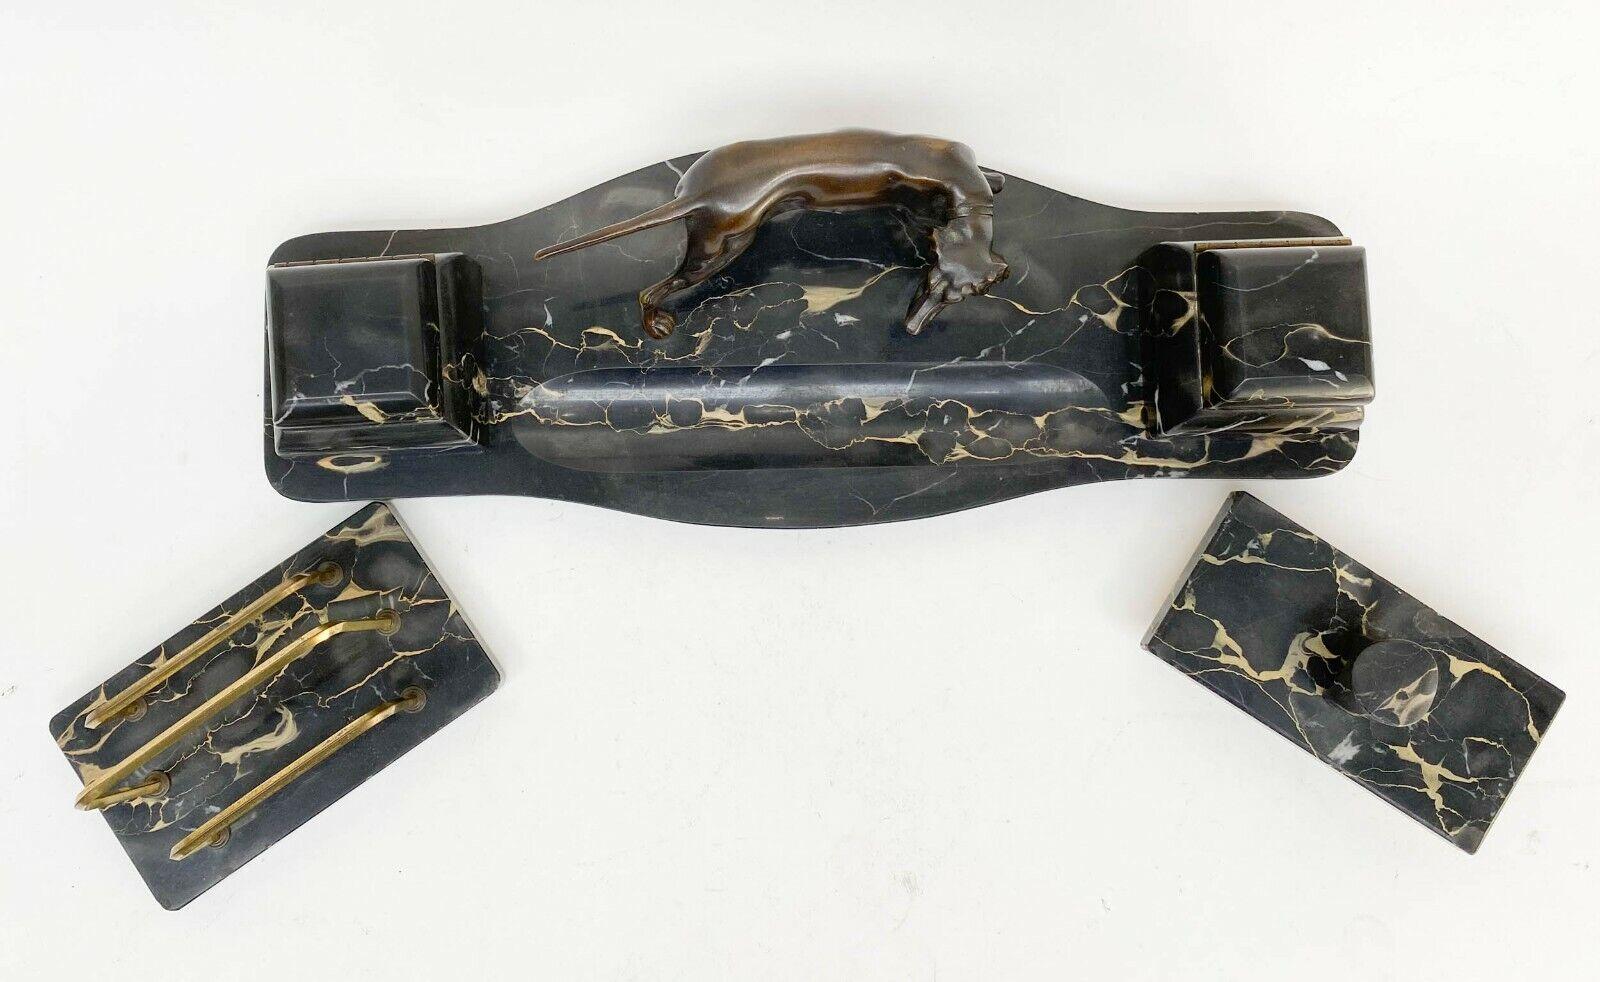 Continental Art Deco Bronze and Black Portor Marble Desk Set, circa 1925

Continental, likely German set includes a double inkwell/pen tray with patinated bronze hunting dog with glass liners in inkwells, an envelope holder with gilt bronze